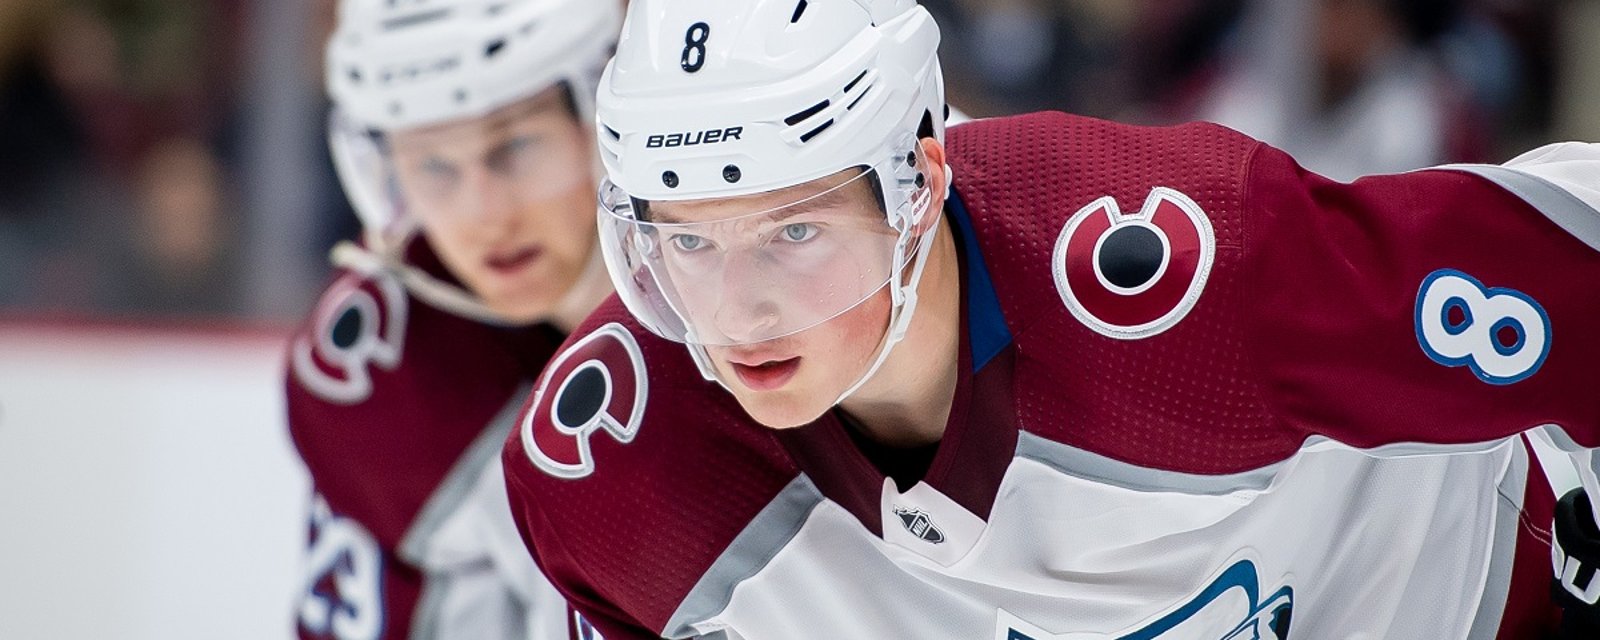 Avalanche confirm rookie sensation Cale Makar has been injured.